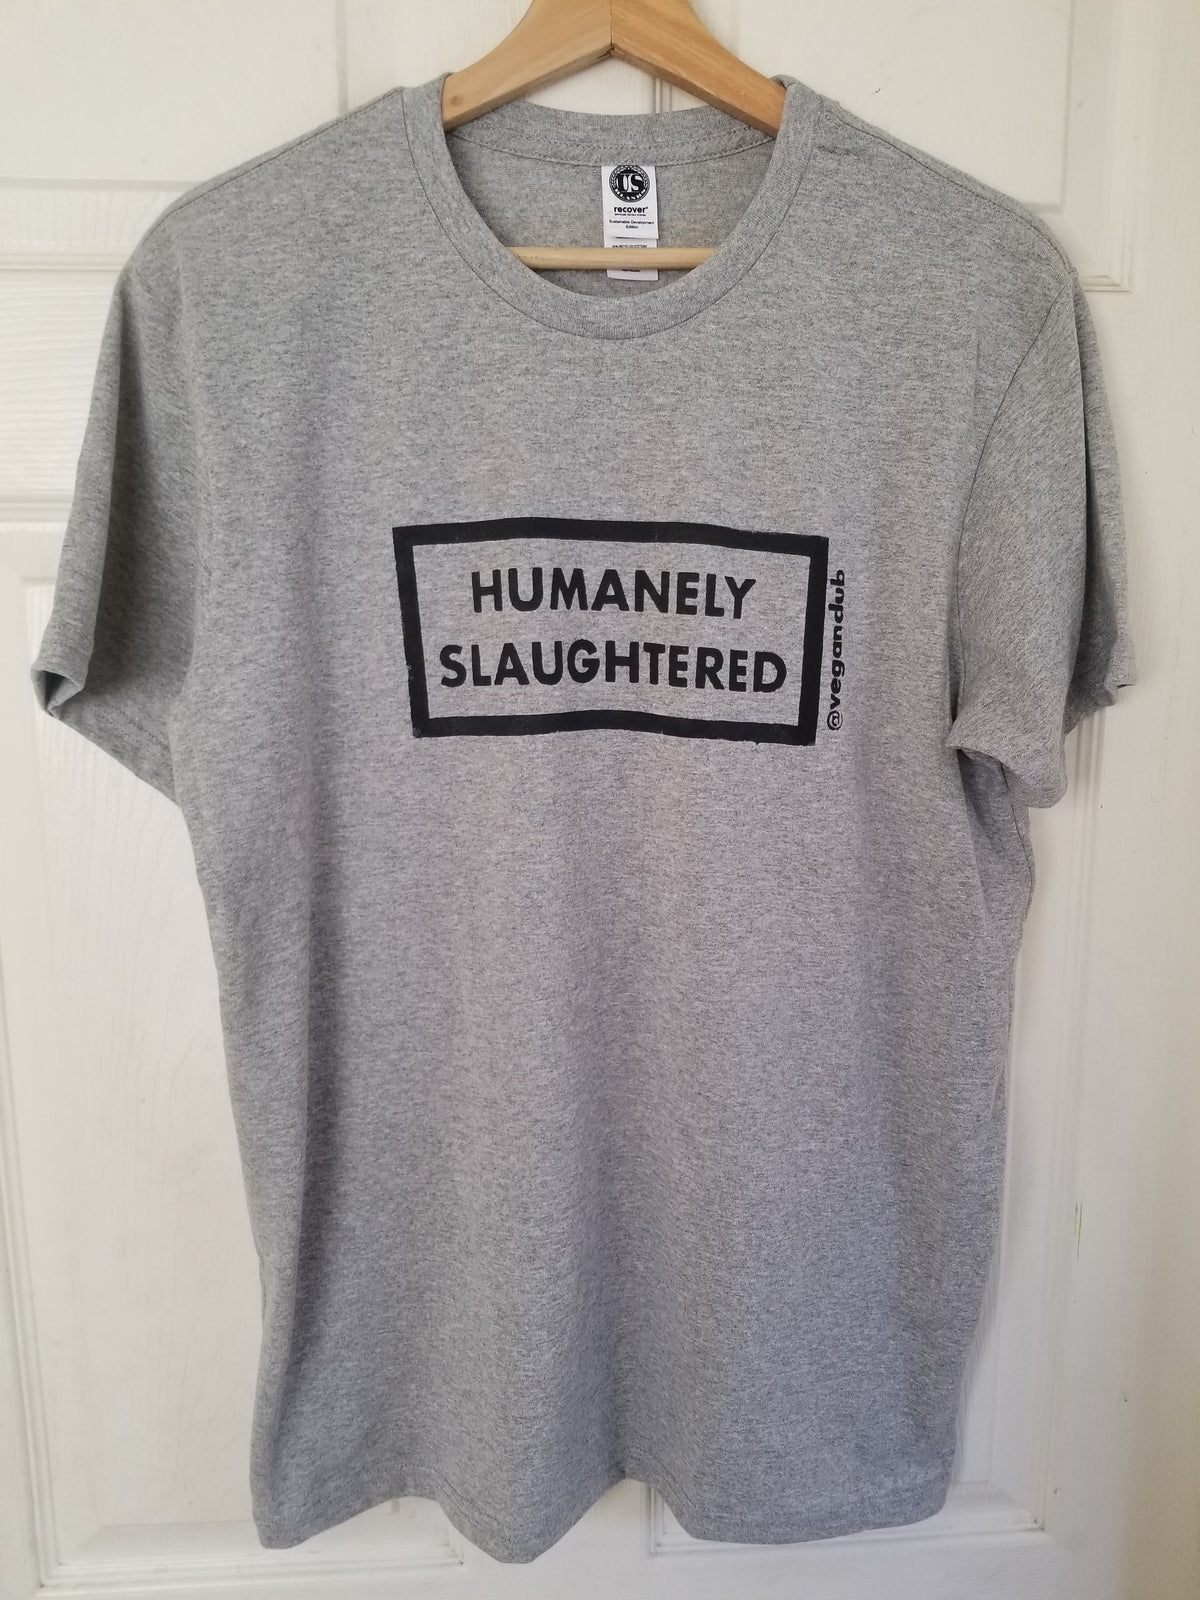 Humanely Slaughtered t-shirt